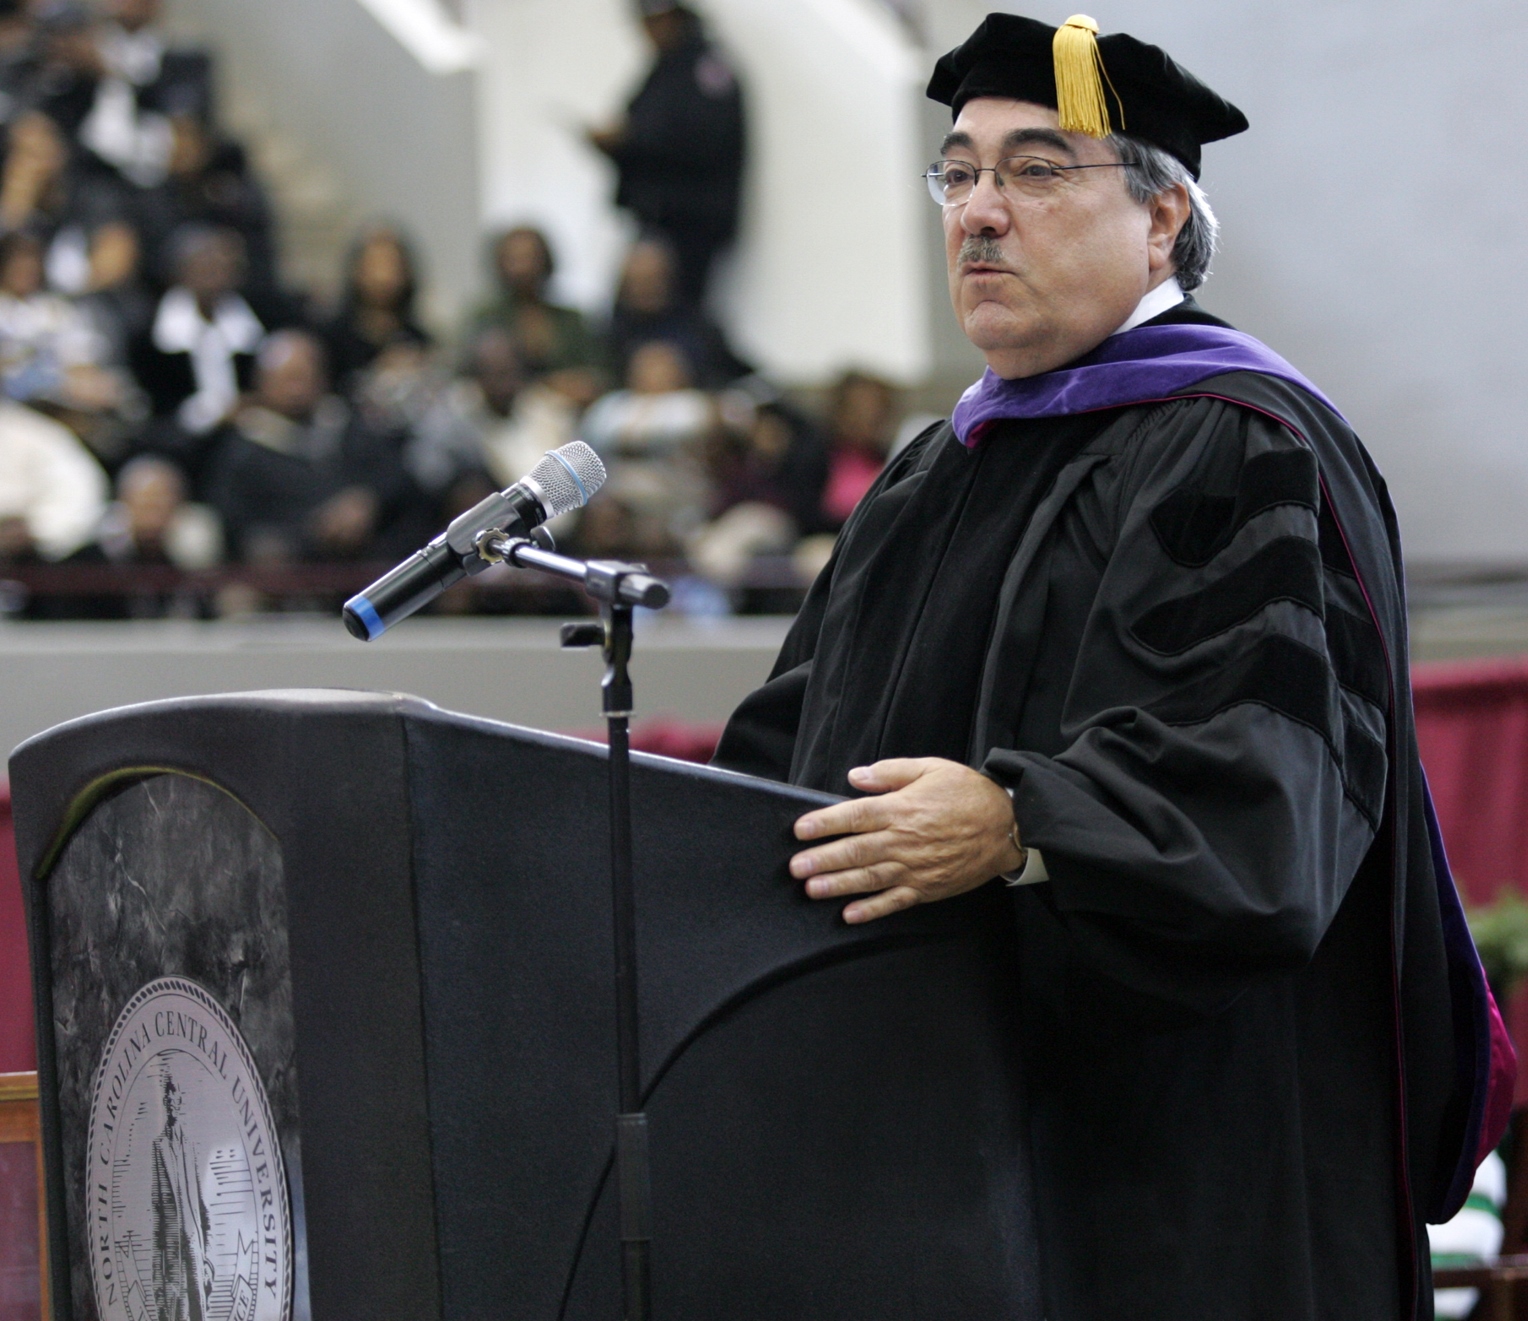 Congressman Butterfield speaking at the North Carolina Central University Commencement